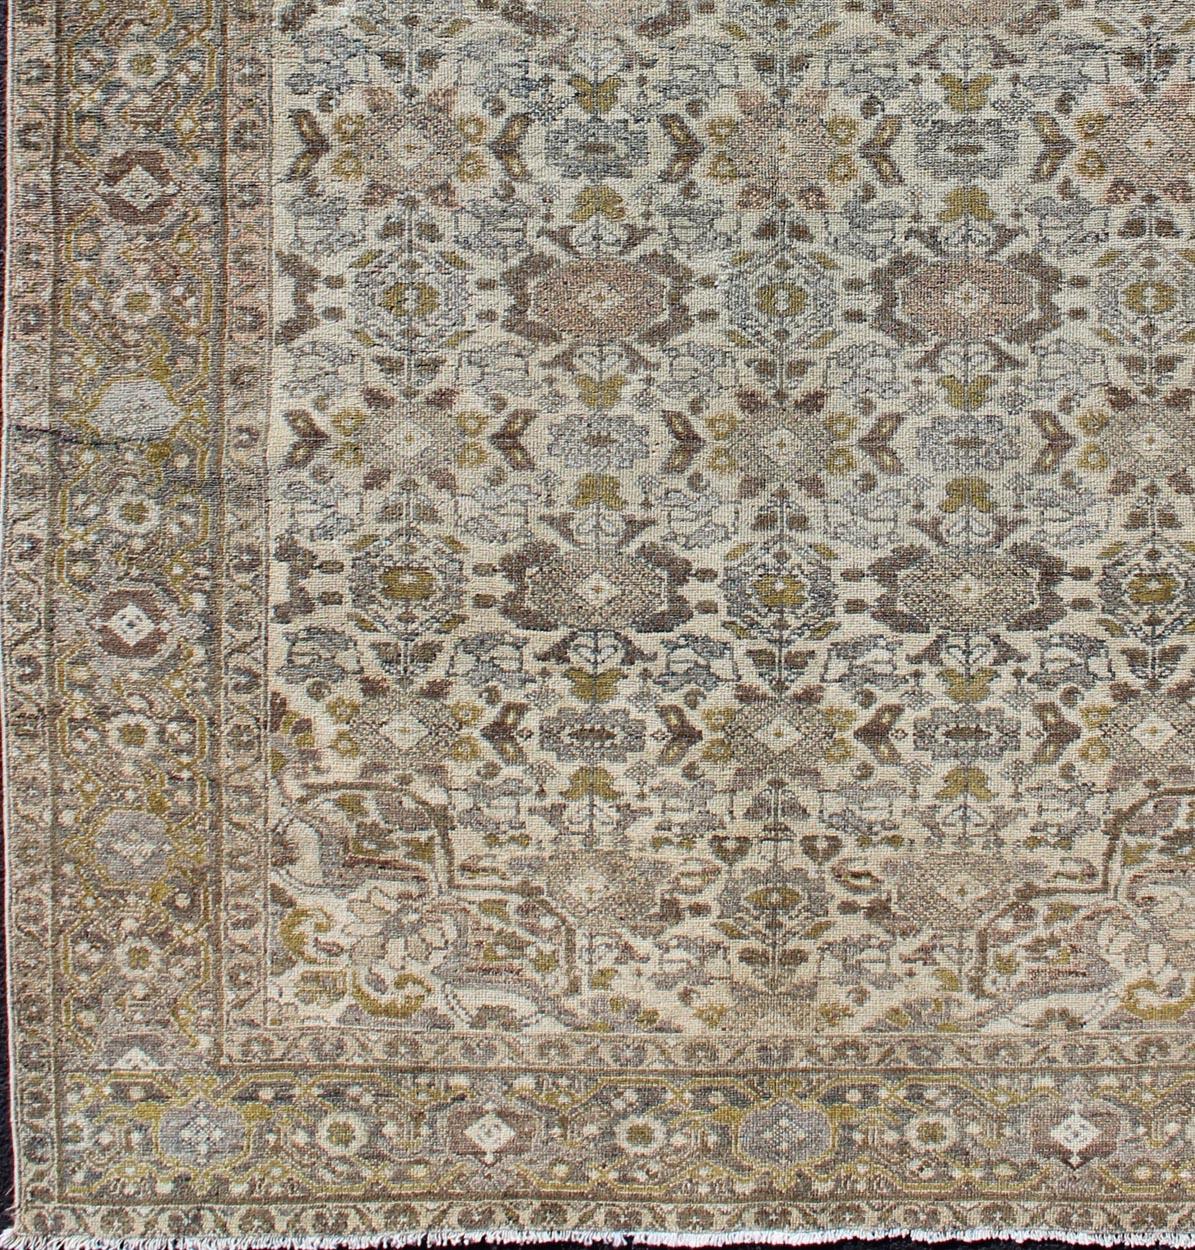 Earth tone Boteh design Persian Malayer antique rug, rug 18-0401, country of origin / type: Iran / Malayer, circa 1910

This antique Persian Malayer rug, circa early 20th century, relies heavily on exquisite details as well as a small-scale